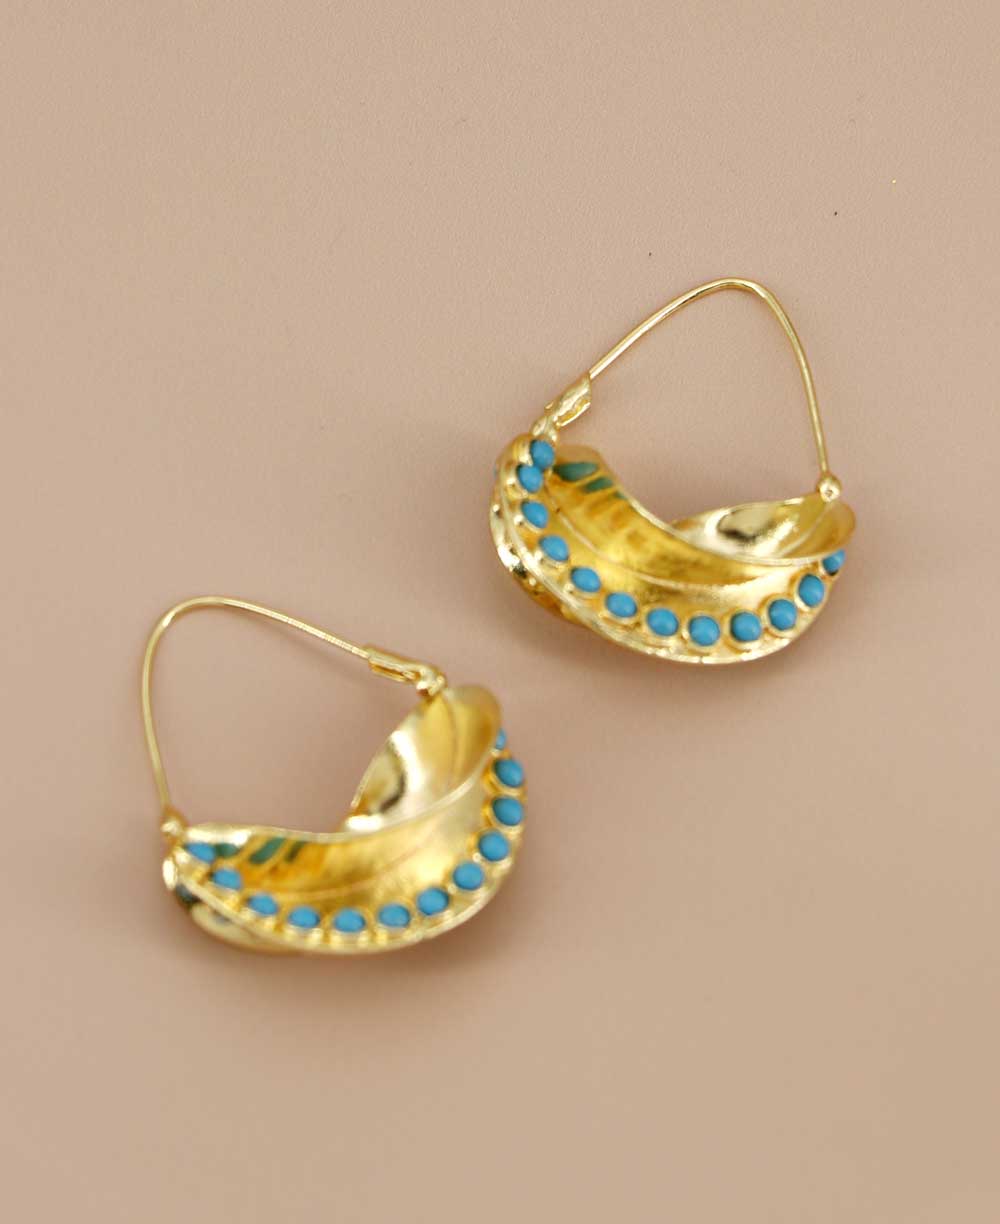 Gold-plated crescent moon earrings with turquoise beads